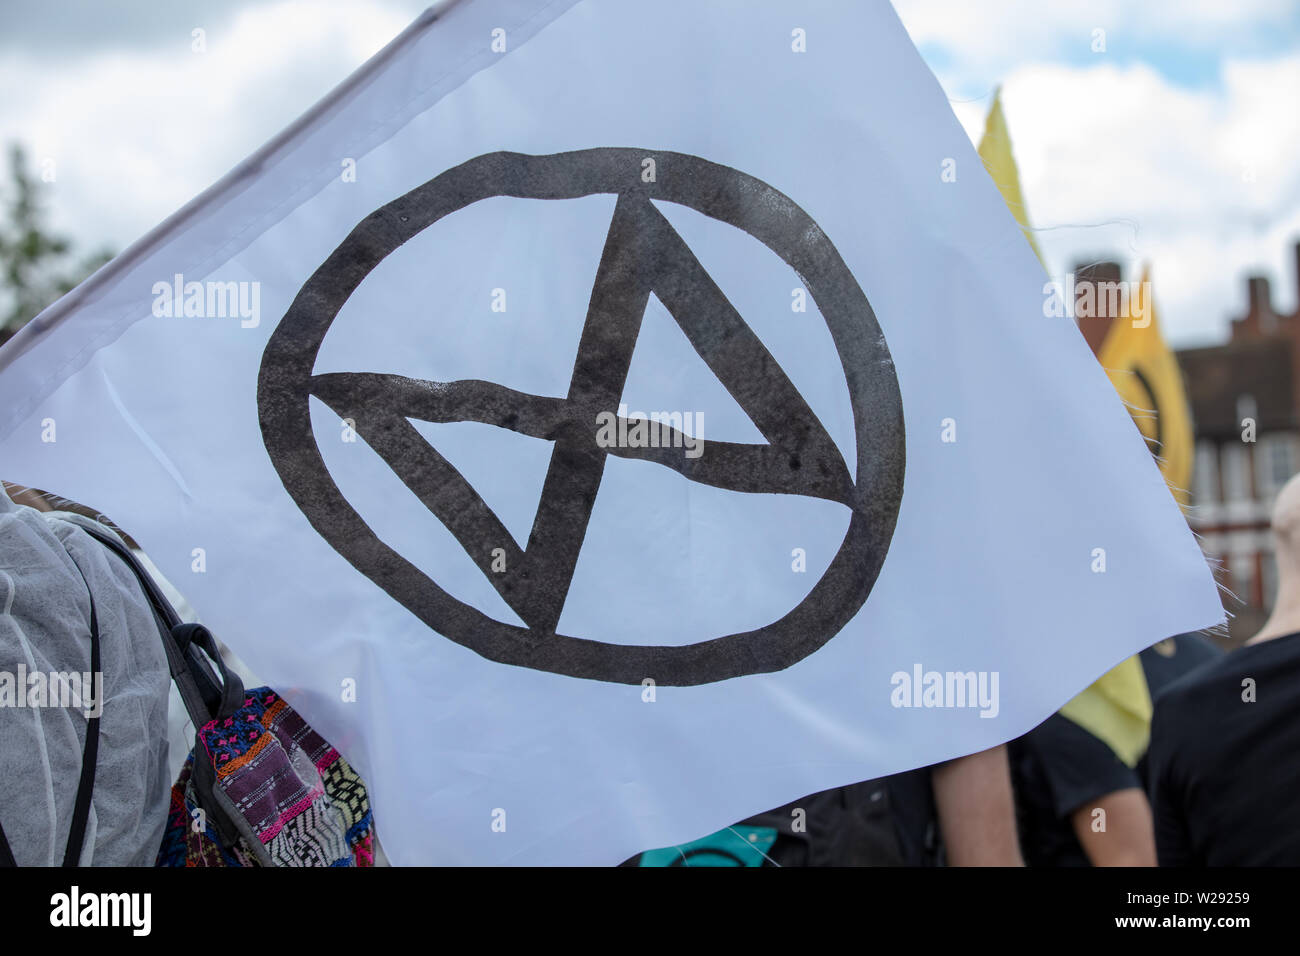 London, UK. 2nd July 2019. Flag of Extinction Rebellion, today creating a silent procession to and theatre in front of several fossil fuel companies. The protest play is based on Bizet's opera Carmen, with real life actors and an opera singer. Credit: Joe Kuis / Alamy News Stock Photo